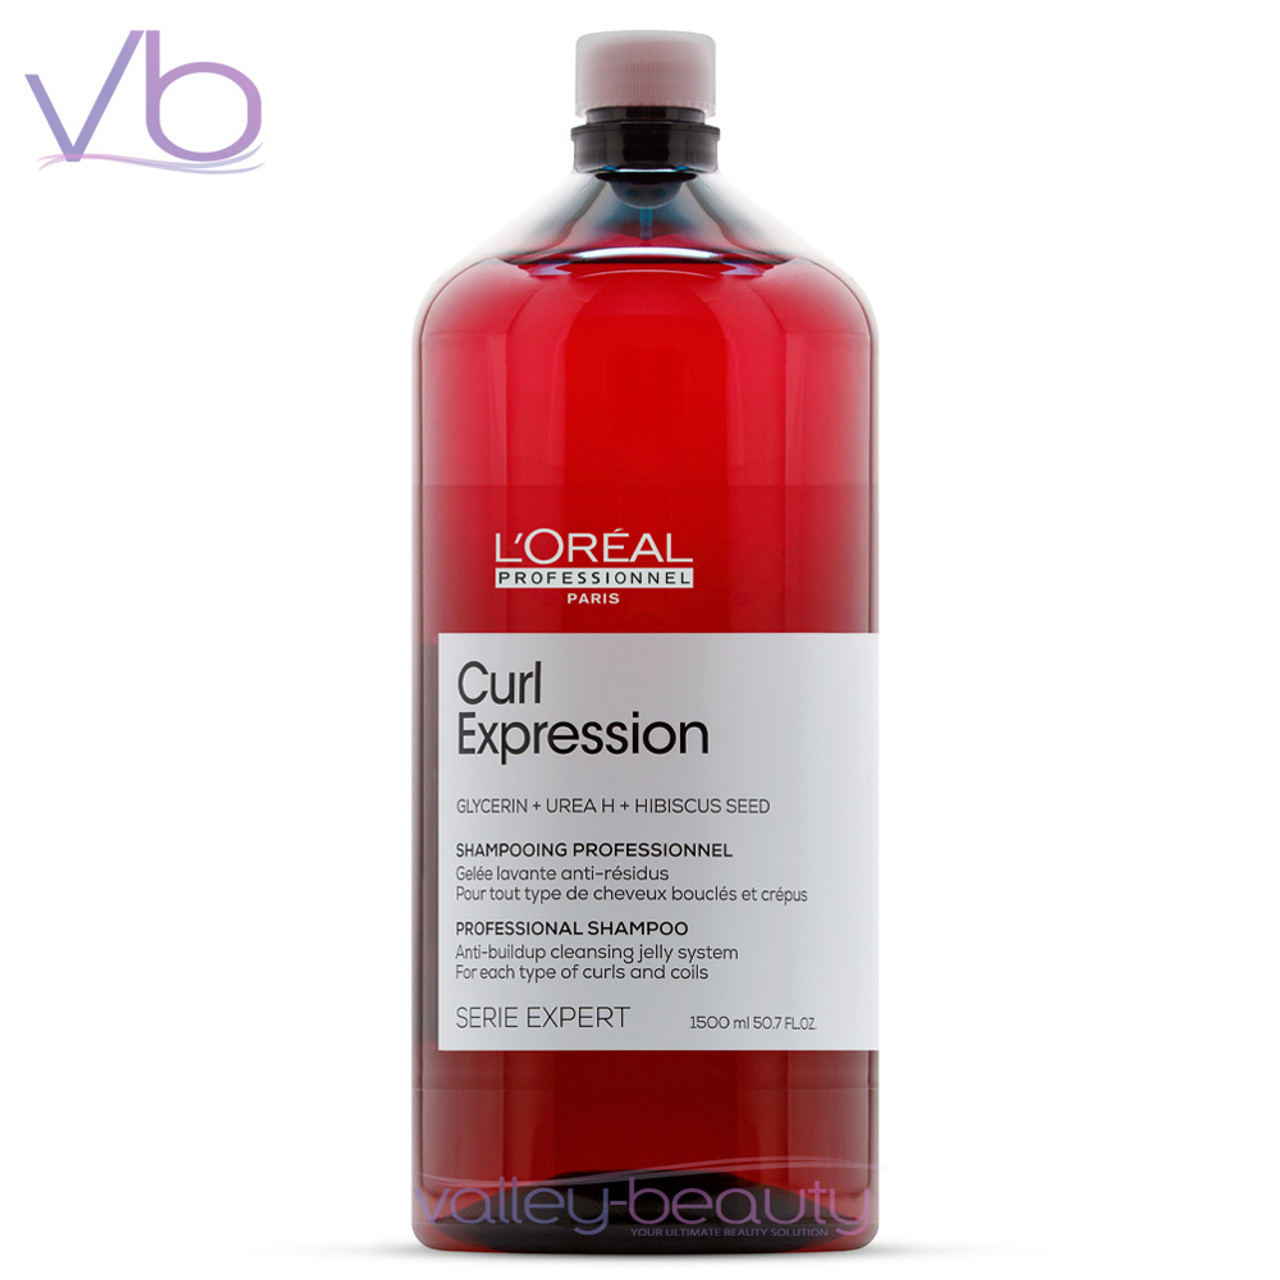 L'Oreal L’Oreal Curl Expression Anti Buildup Shampoo with Pump | Gentle Jelly Cleanser for Curly, Coily and Wavy Hair, 1500ml